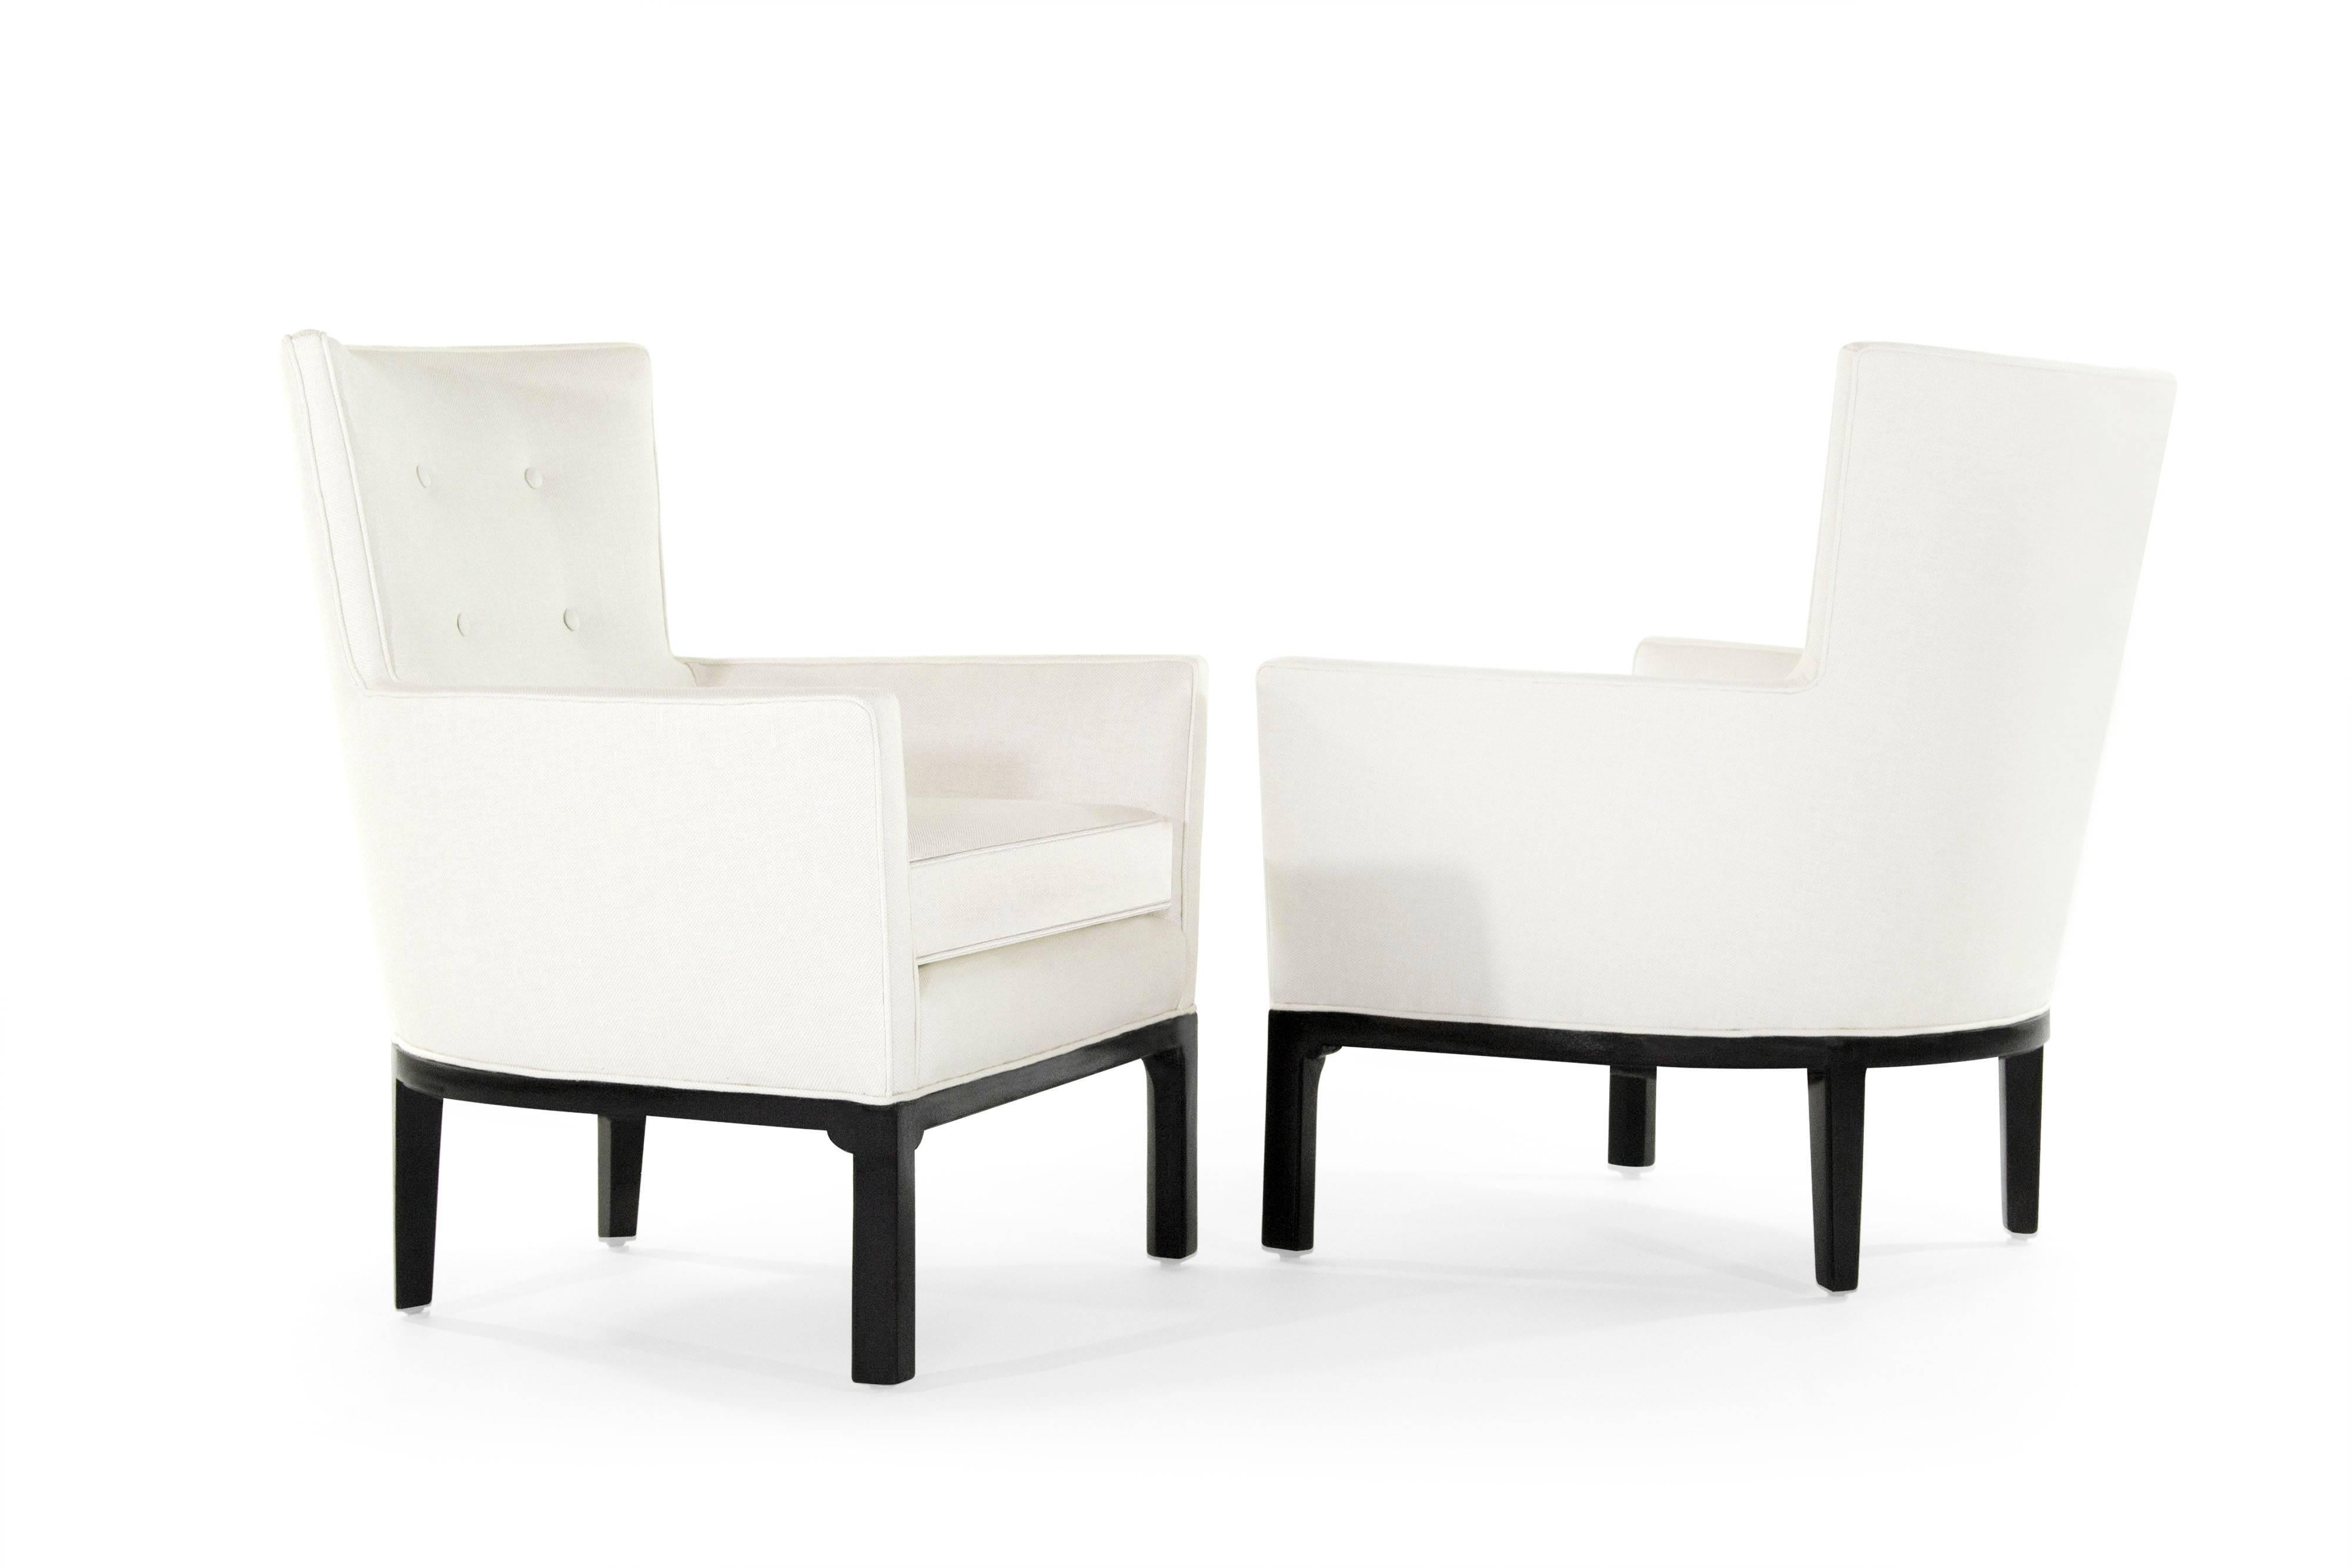 20th Century Distinguished French Deco Armchairs, circa 1940s